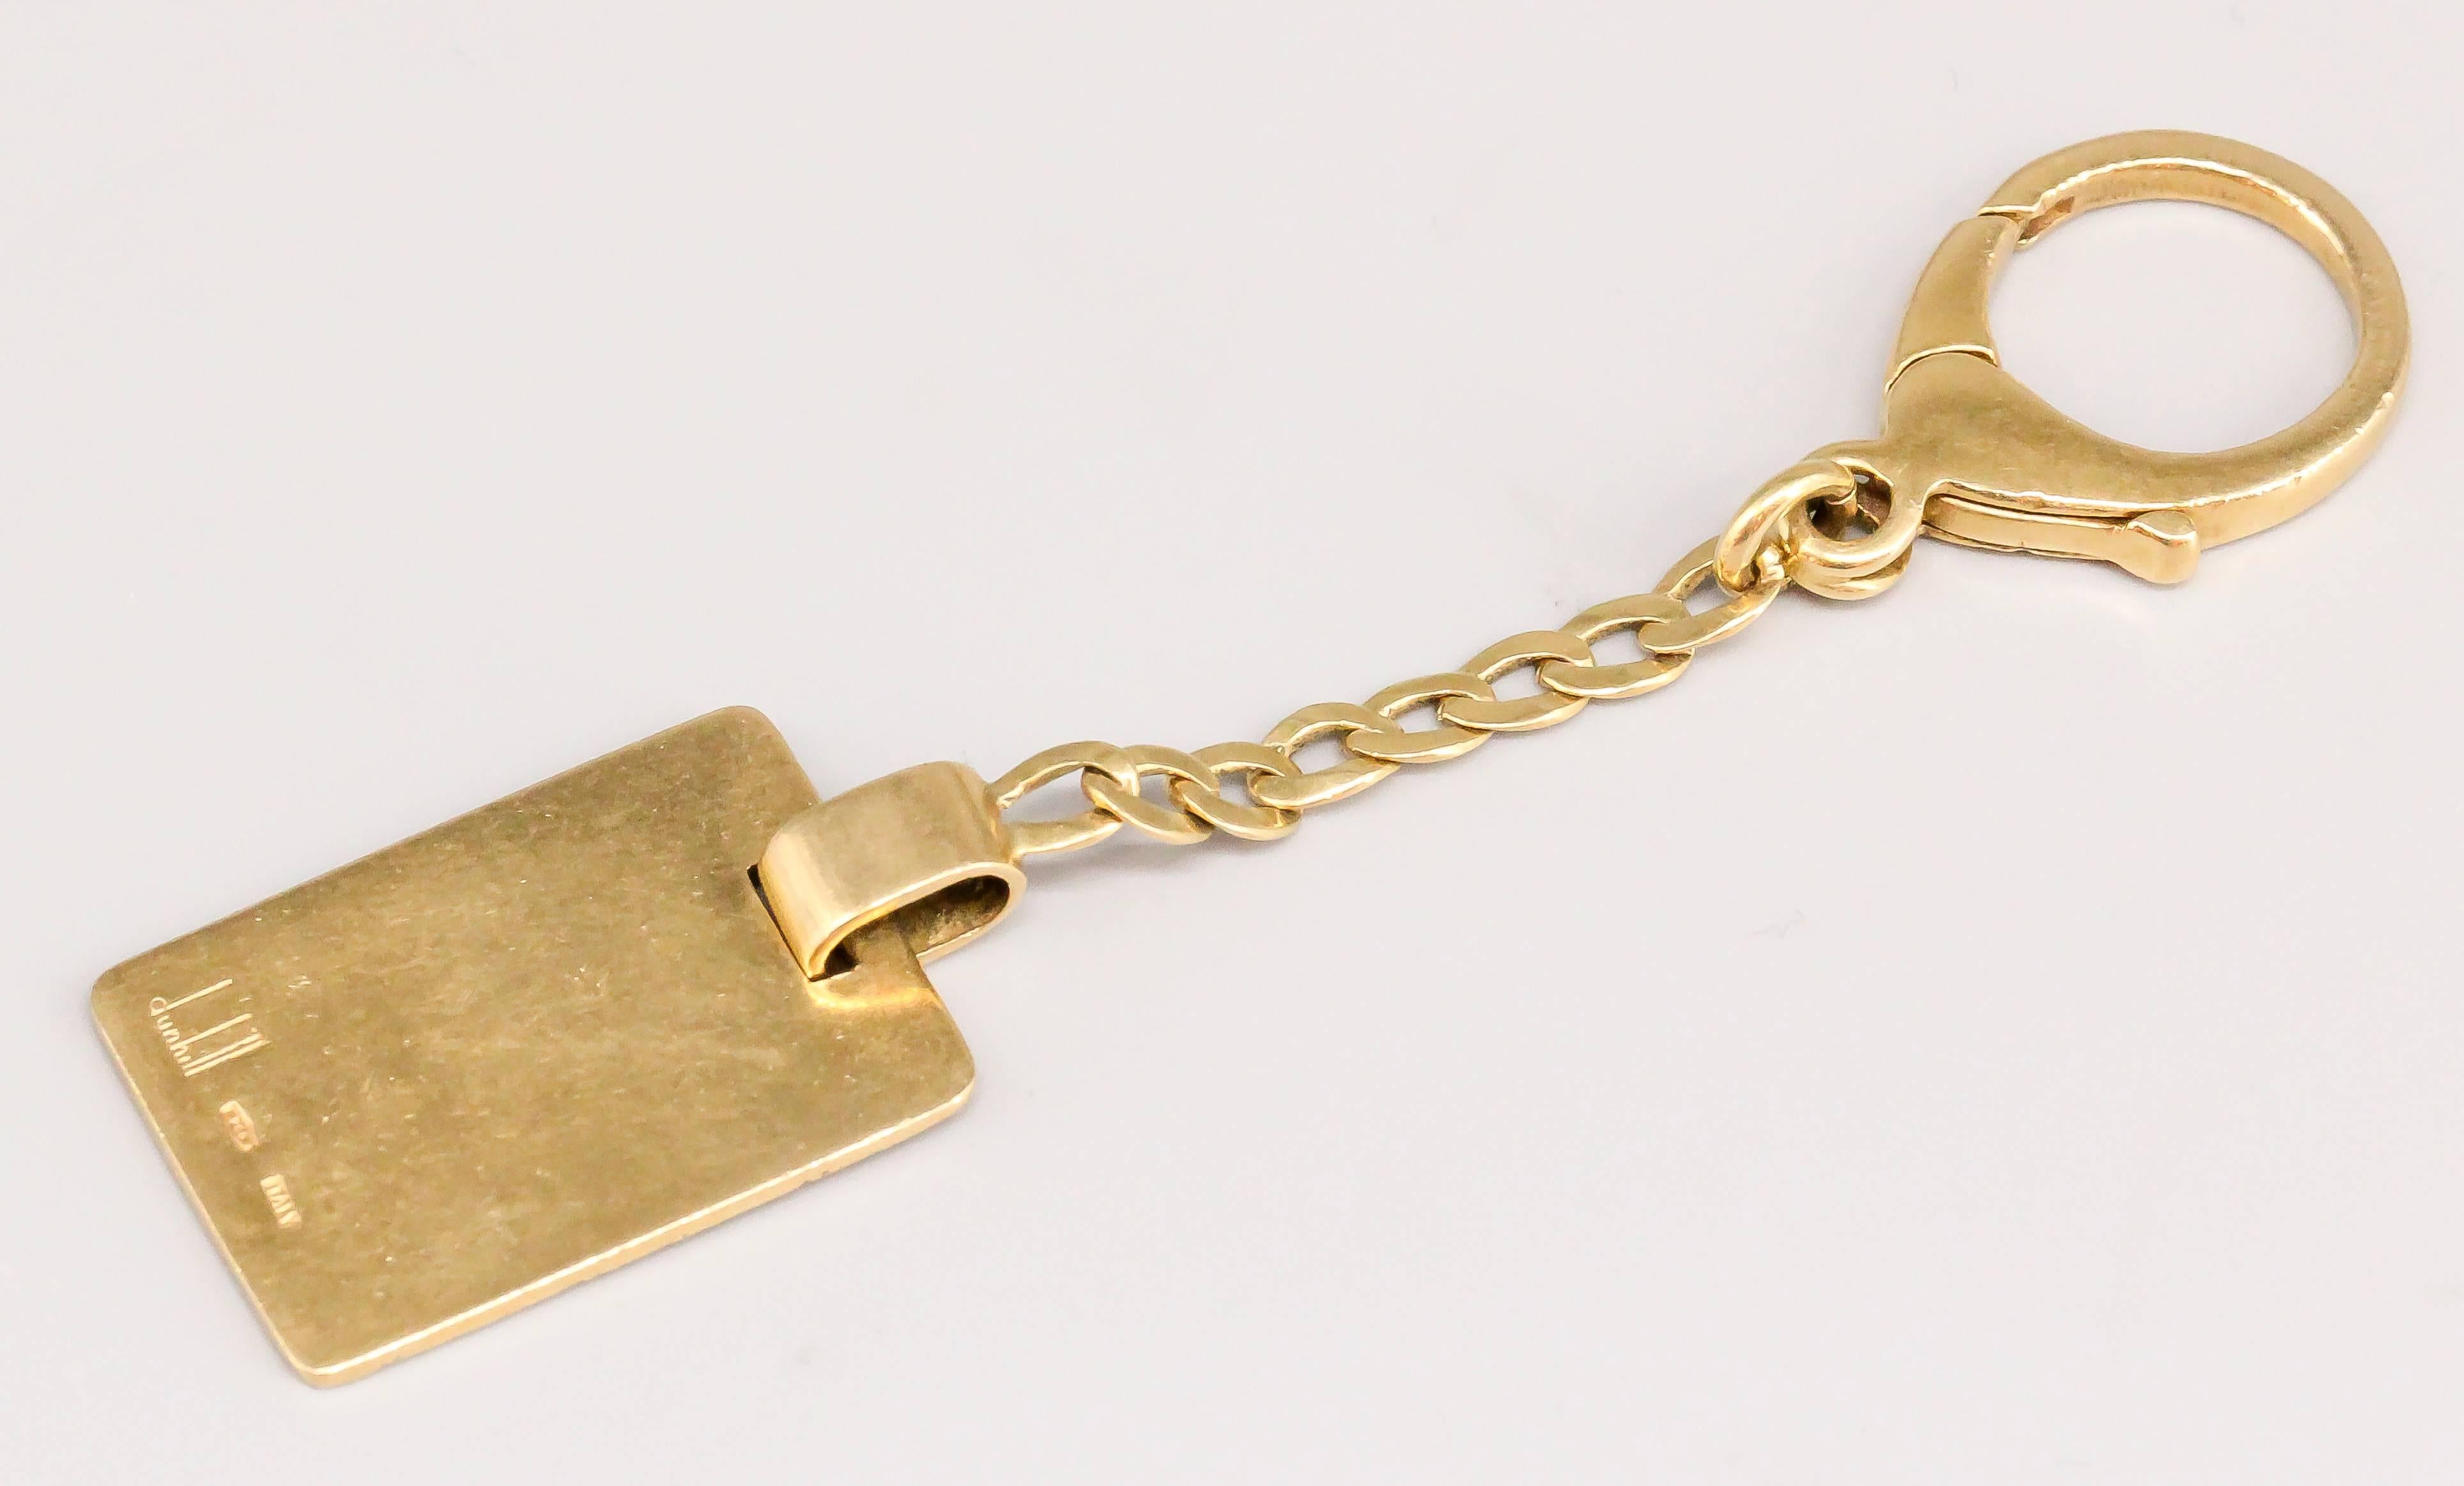 Handsome 18k yellow gold keychain by Dunhill, circa 1960s-70s. It features a rectangular shape with one side textured and the other polished smooth with space for personalized message. With small chain and hook for ease of installation on